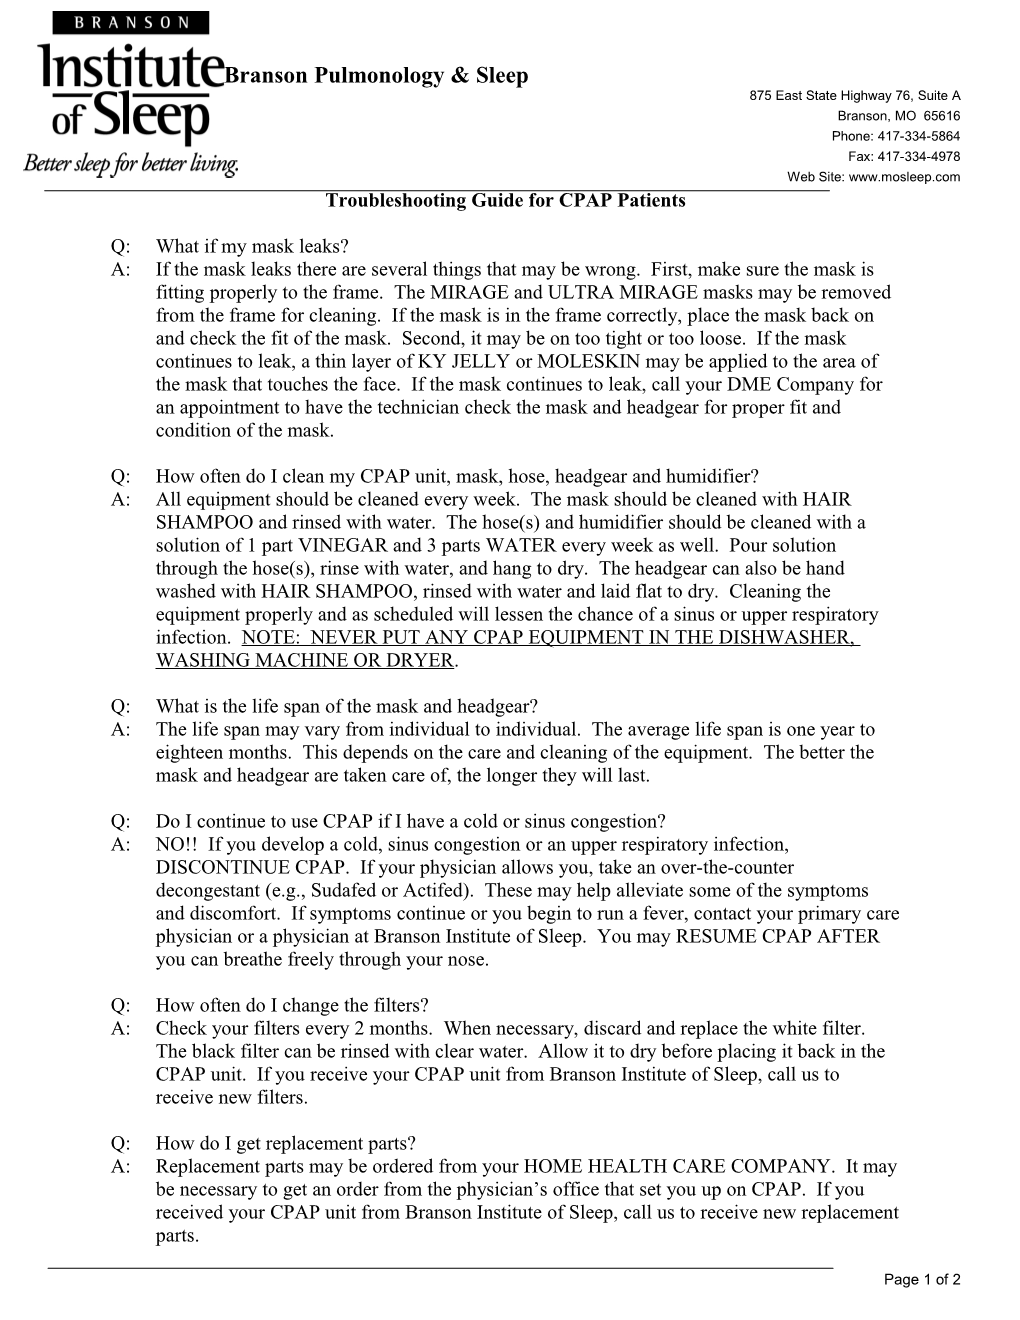 Troubleshooting Guide for CPAP Patients